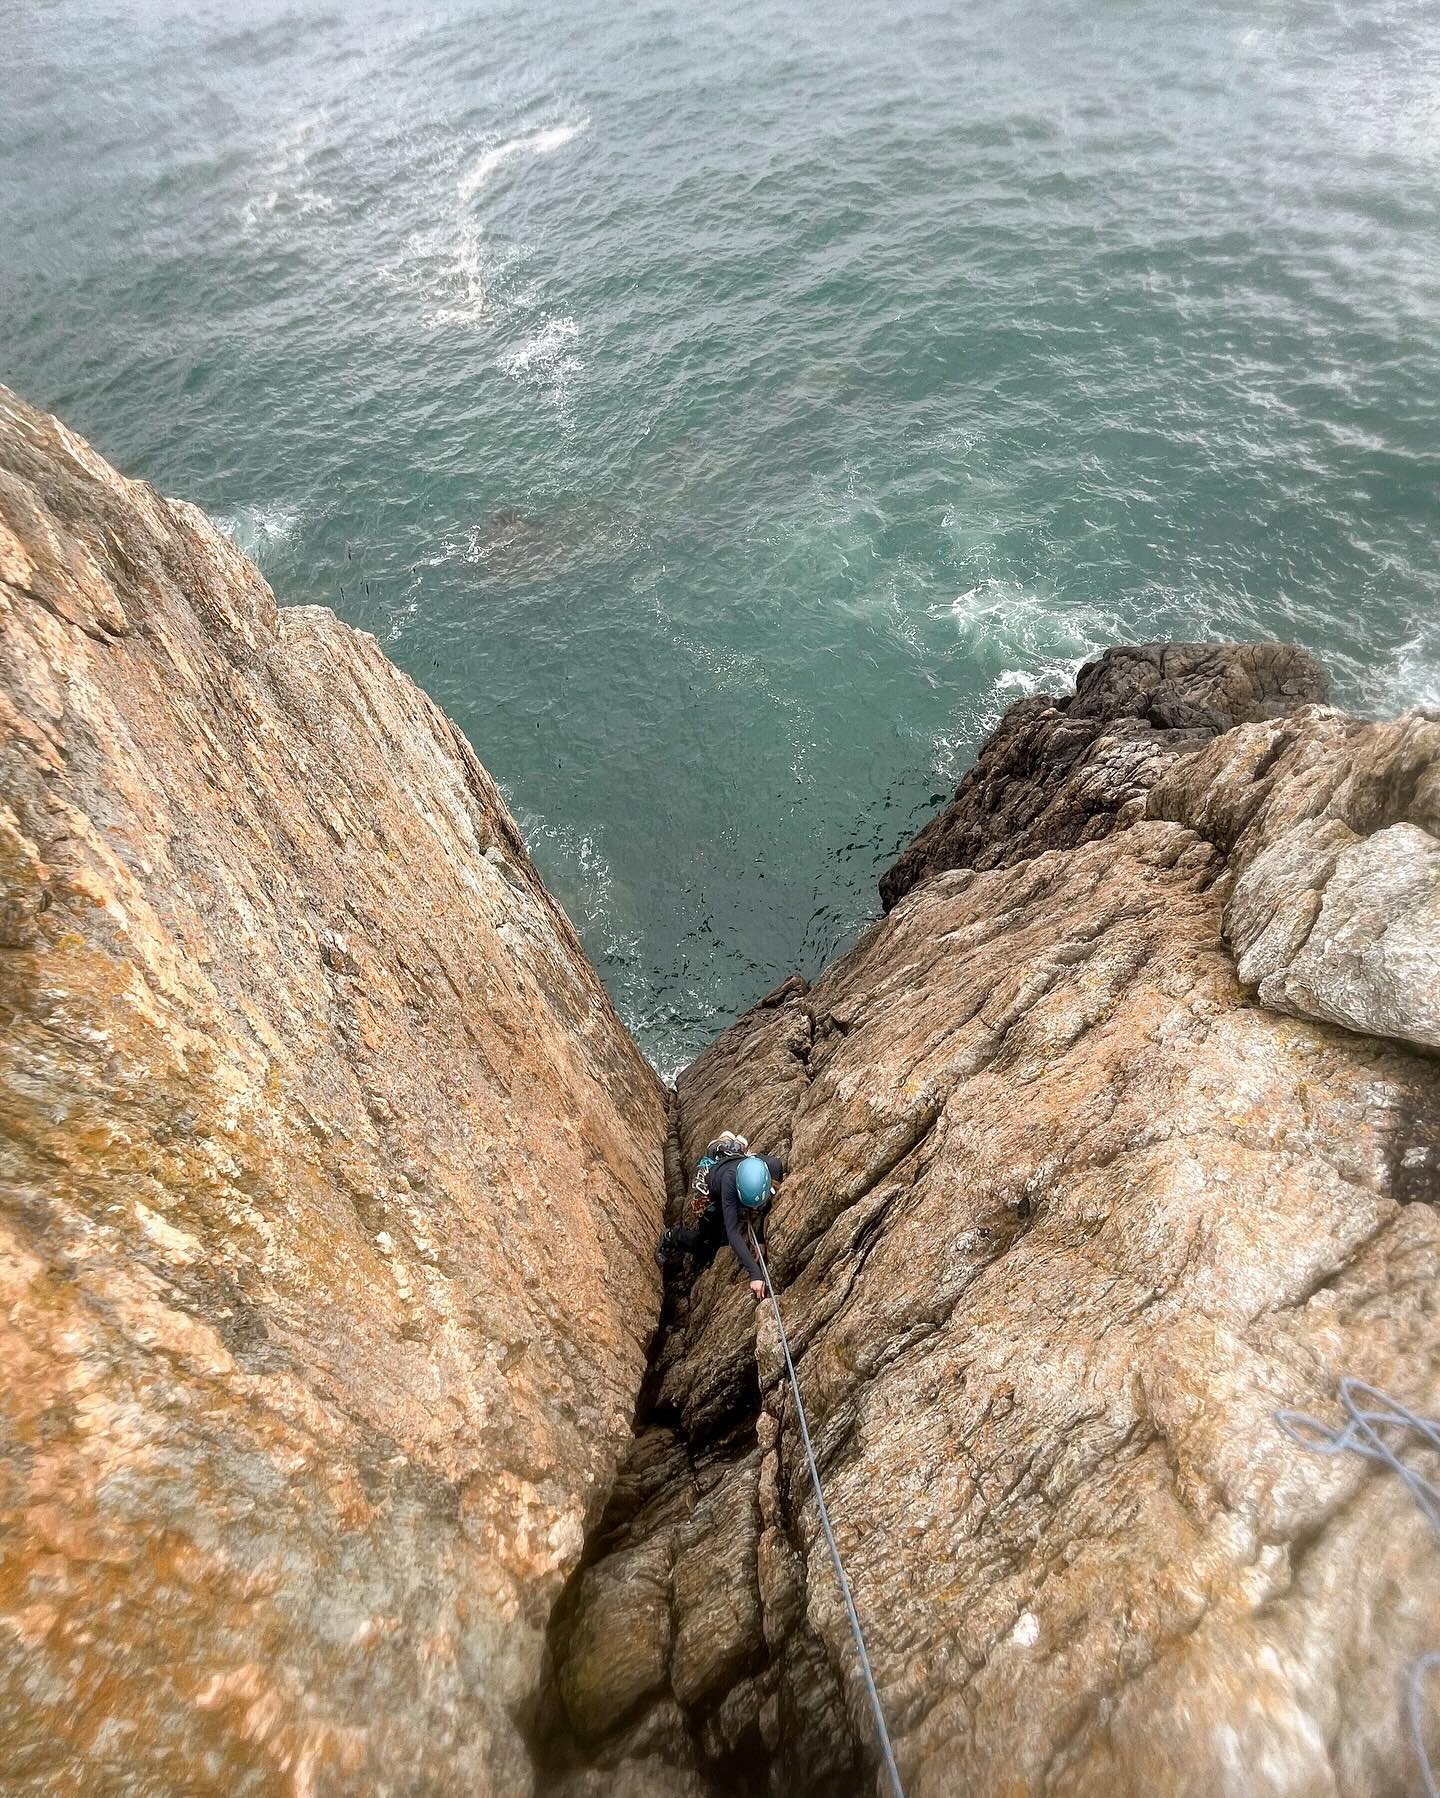 Hanging out above to sea today with @trek_with_cair 

We managed to climb some new grades for Cair today, first Severe, Hard Severe and VS! Top job!

#northwales #northwalesclimbing #seacliff #rockclimbing #anglesey #ynysm&ocirc;n #climbinganchors #t